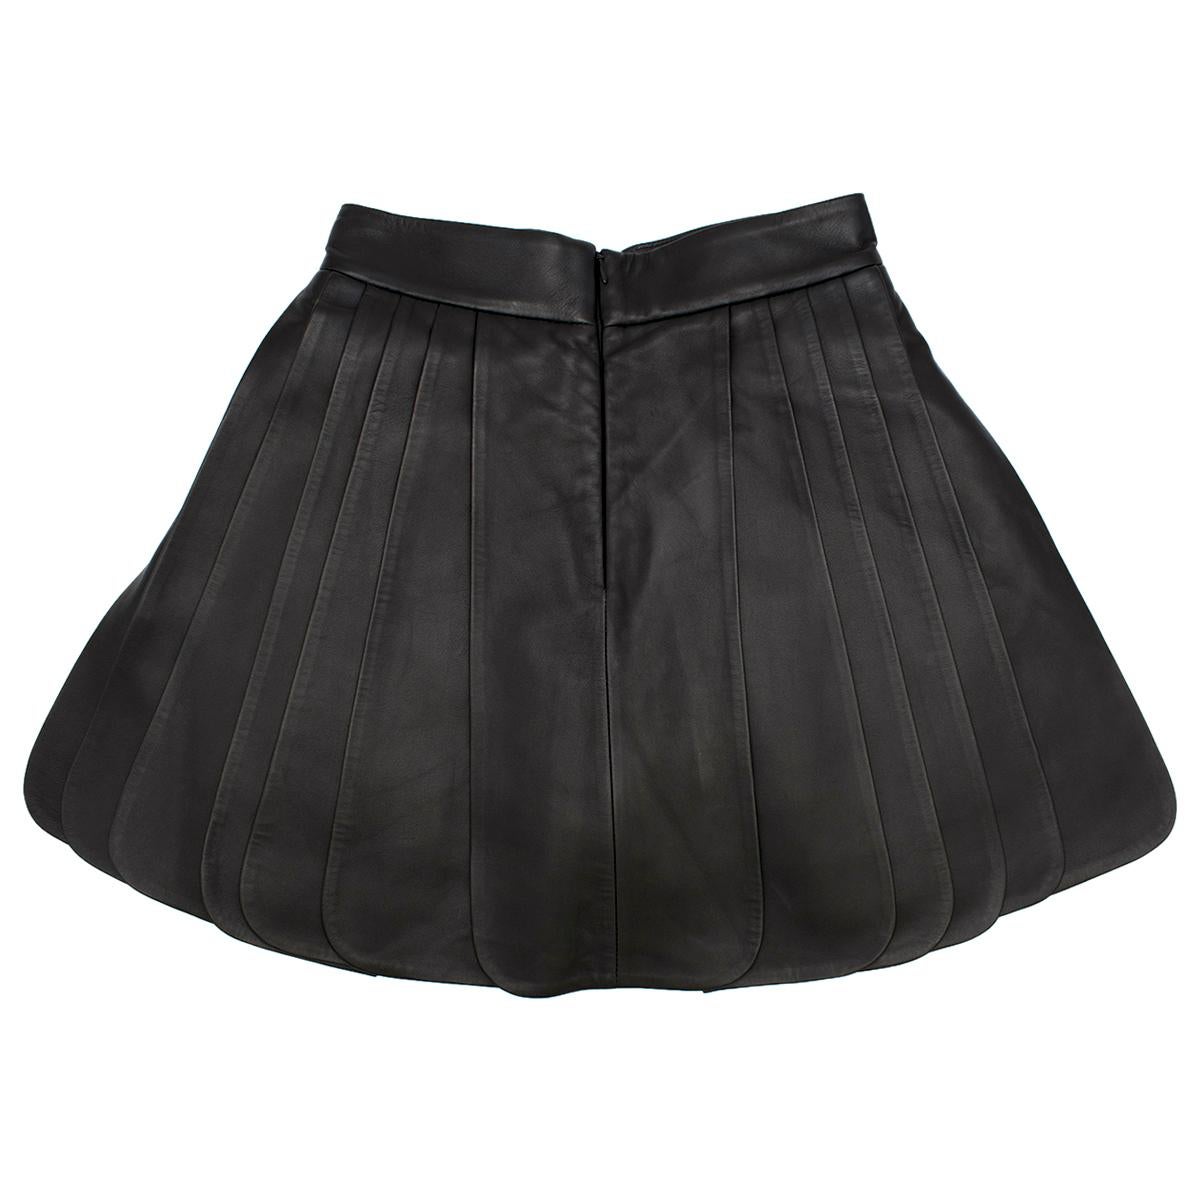 Brandon Maxwell Pleated Leather Mini Skirt in Black

- Black leather pleated skirt 
- Silk short underneath
- Hidden zip fastening to the middle back 

Please note, these items are pre-owned and may show some signs of storage, even when unworn and